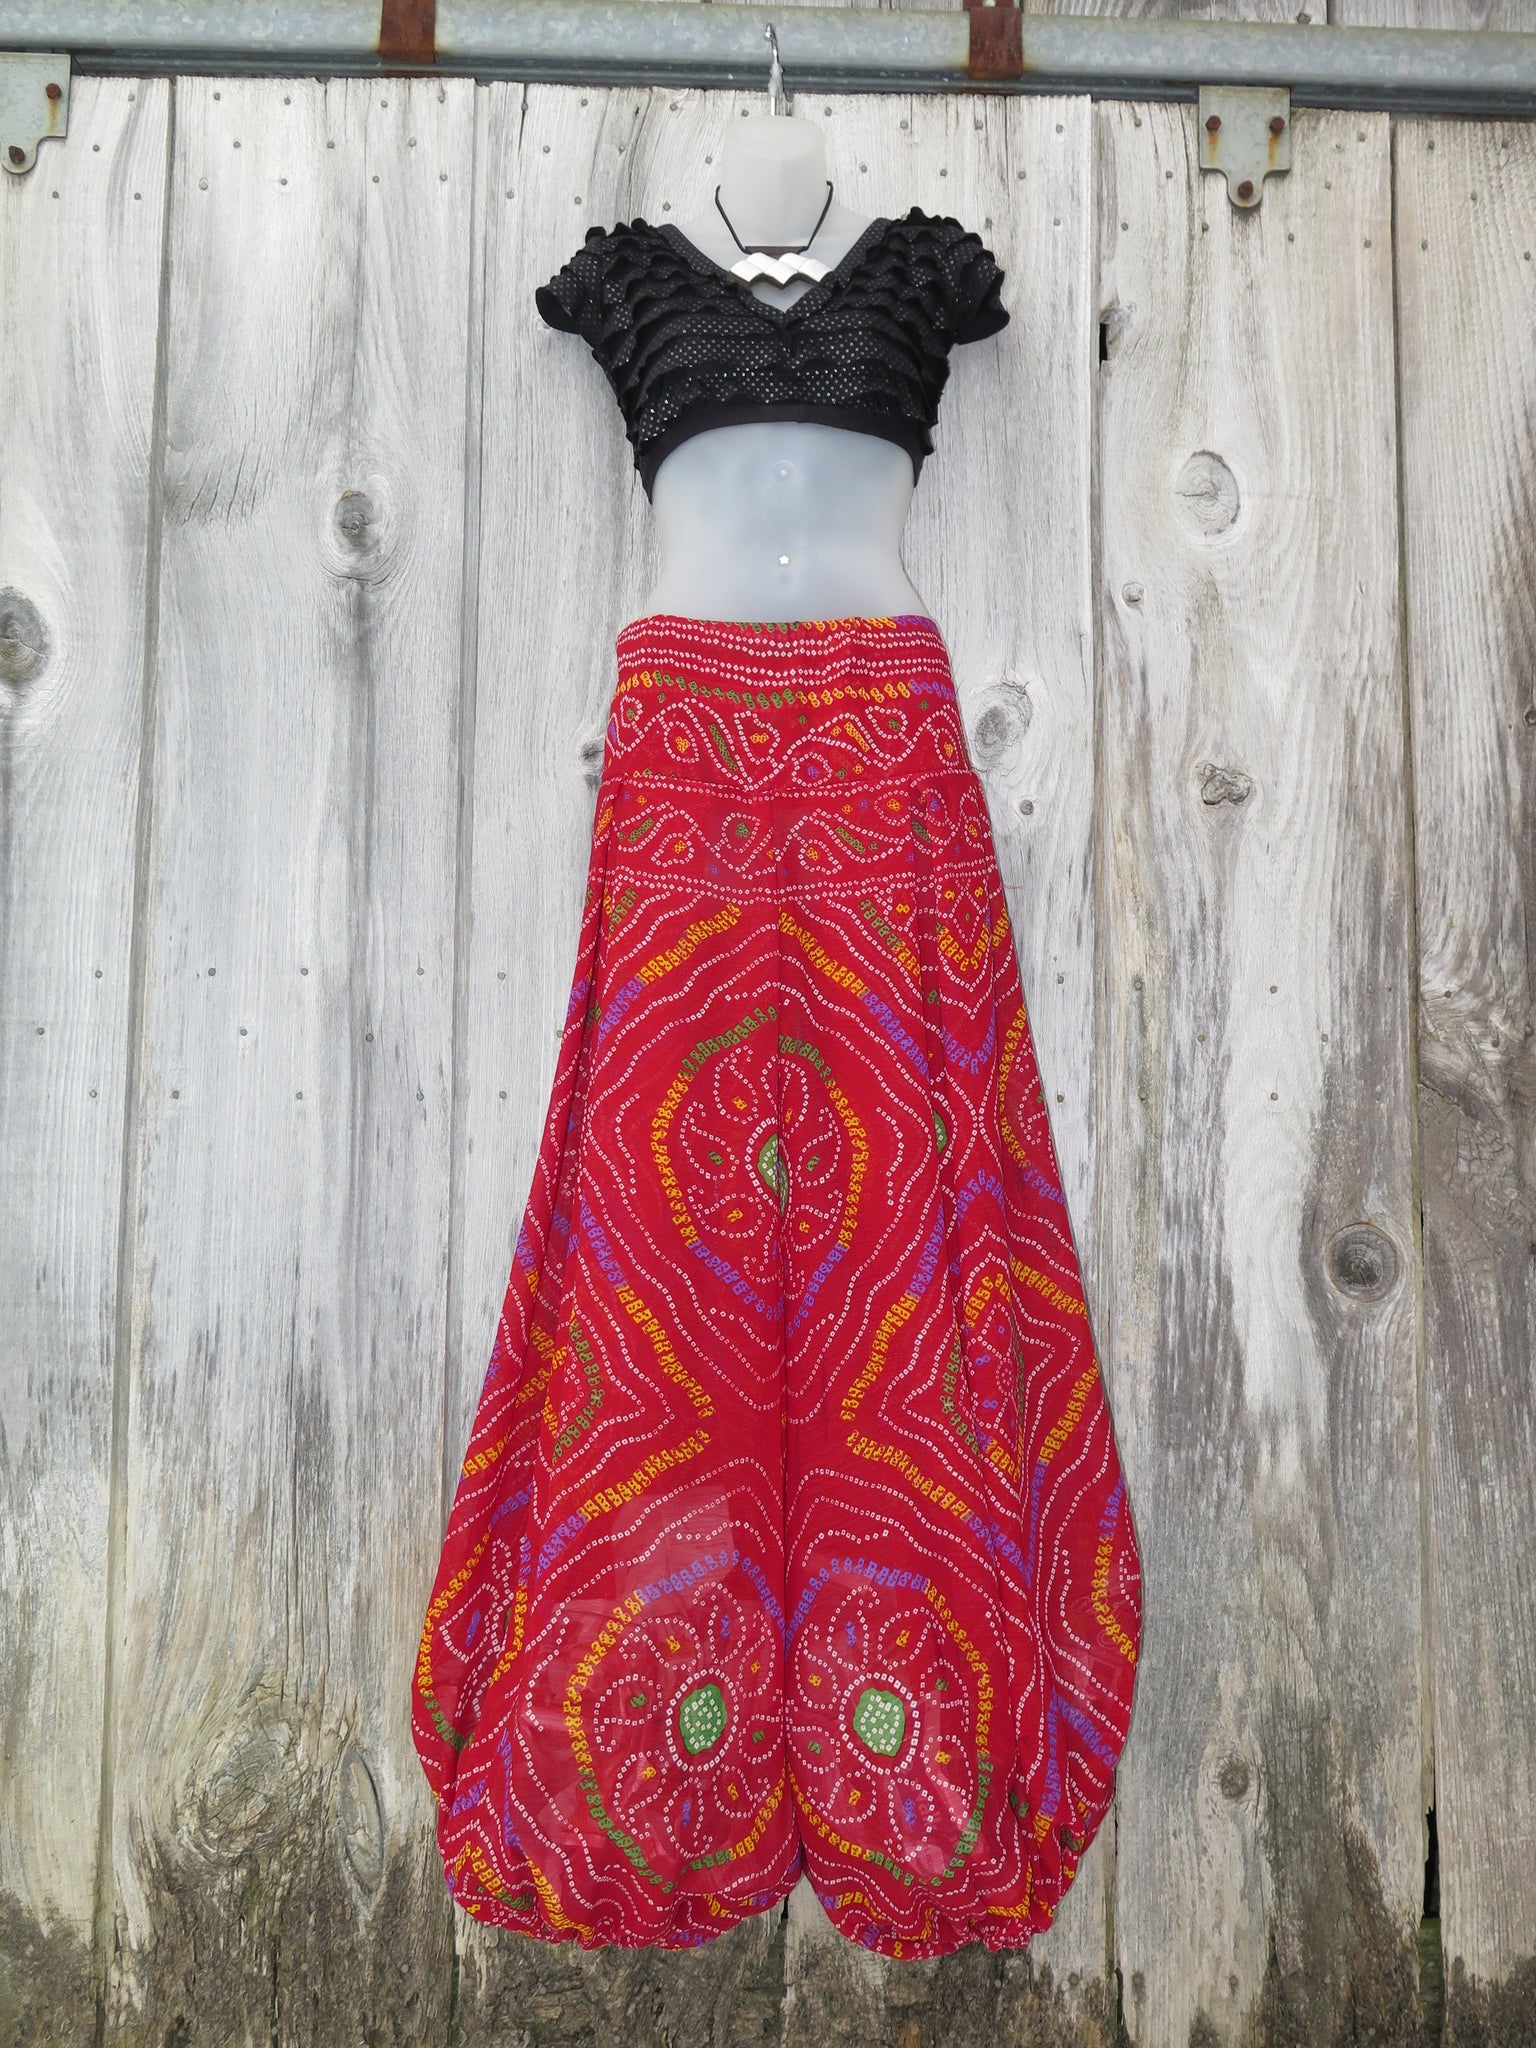 Red Bandhani Pantaloons by PoppyPants Tribal in Rome, Italy